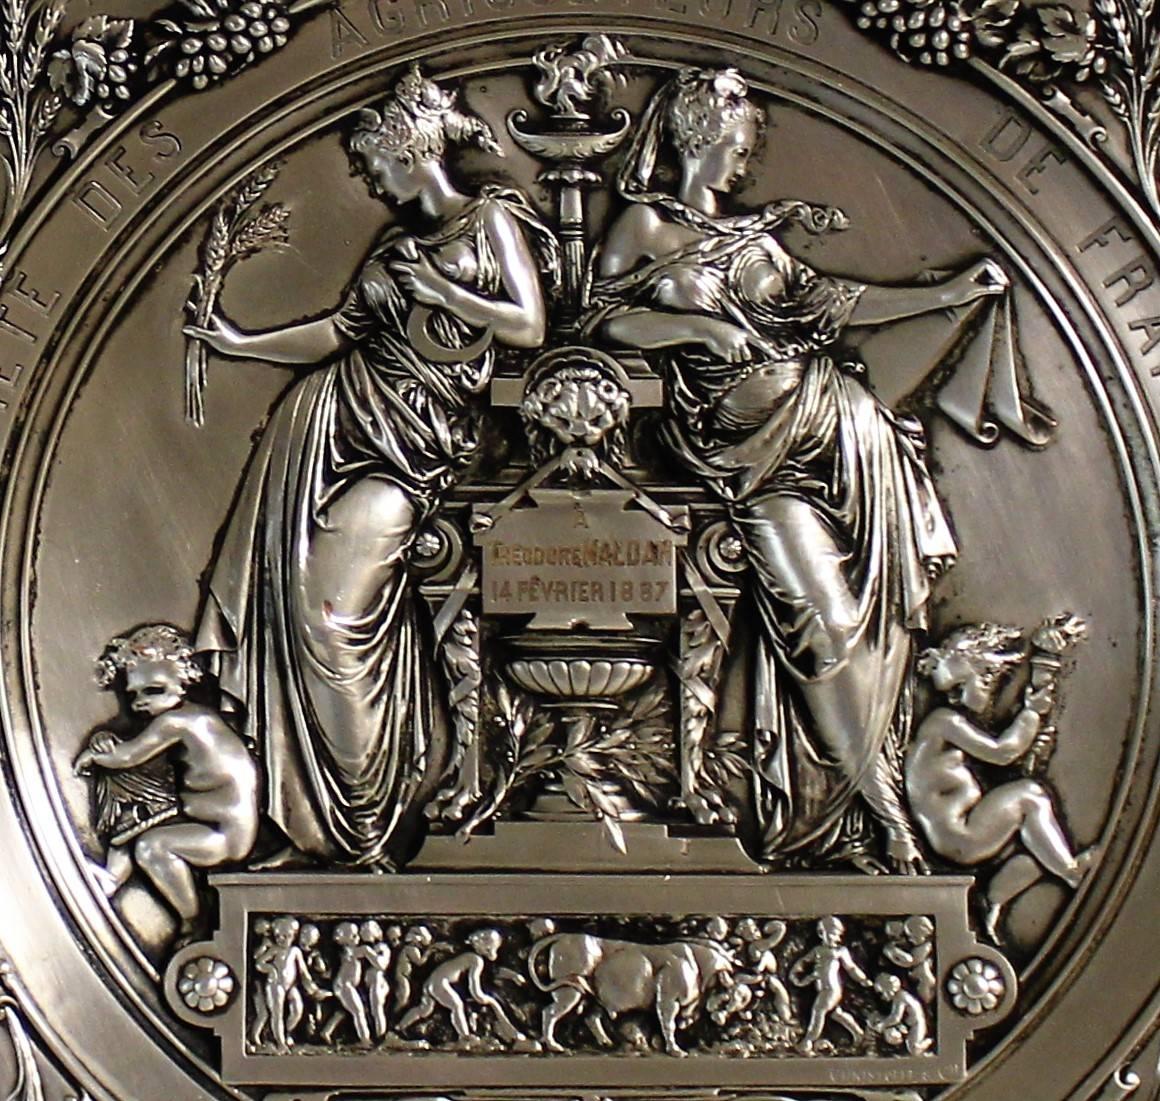 Award plaque made by Christofle and commissioned by the Societe des Agriculteurs de France.  It was issued to Theodore Maldan in 1887.